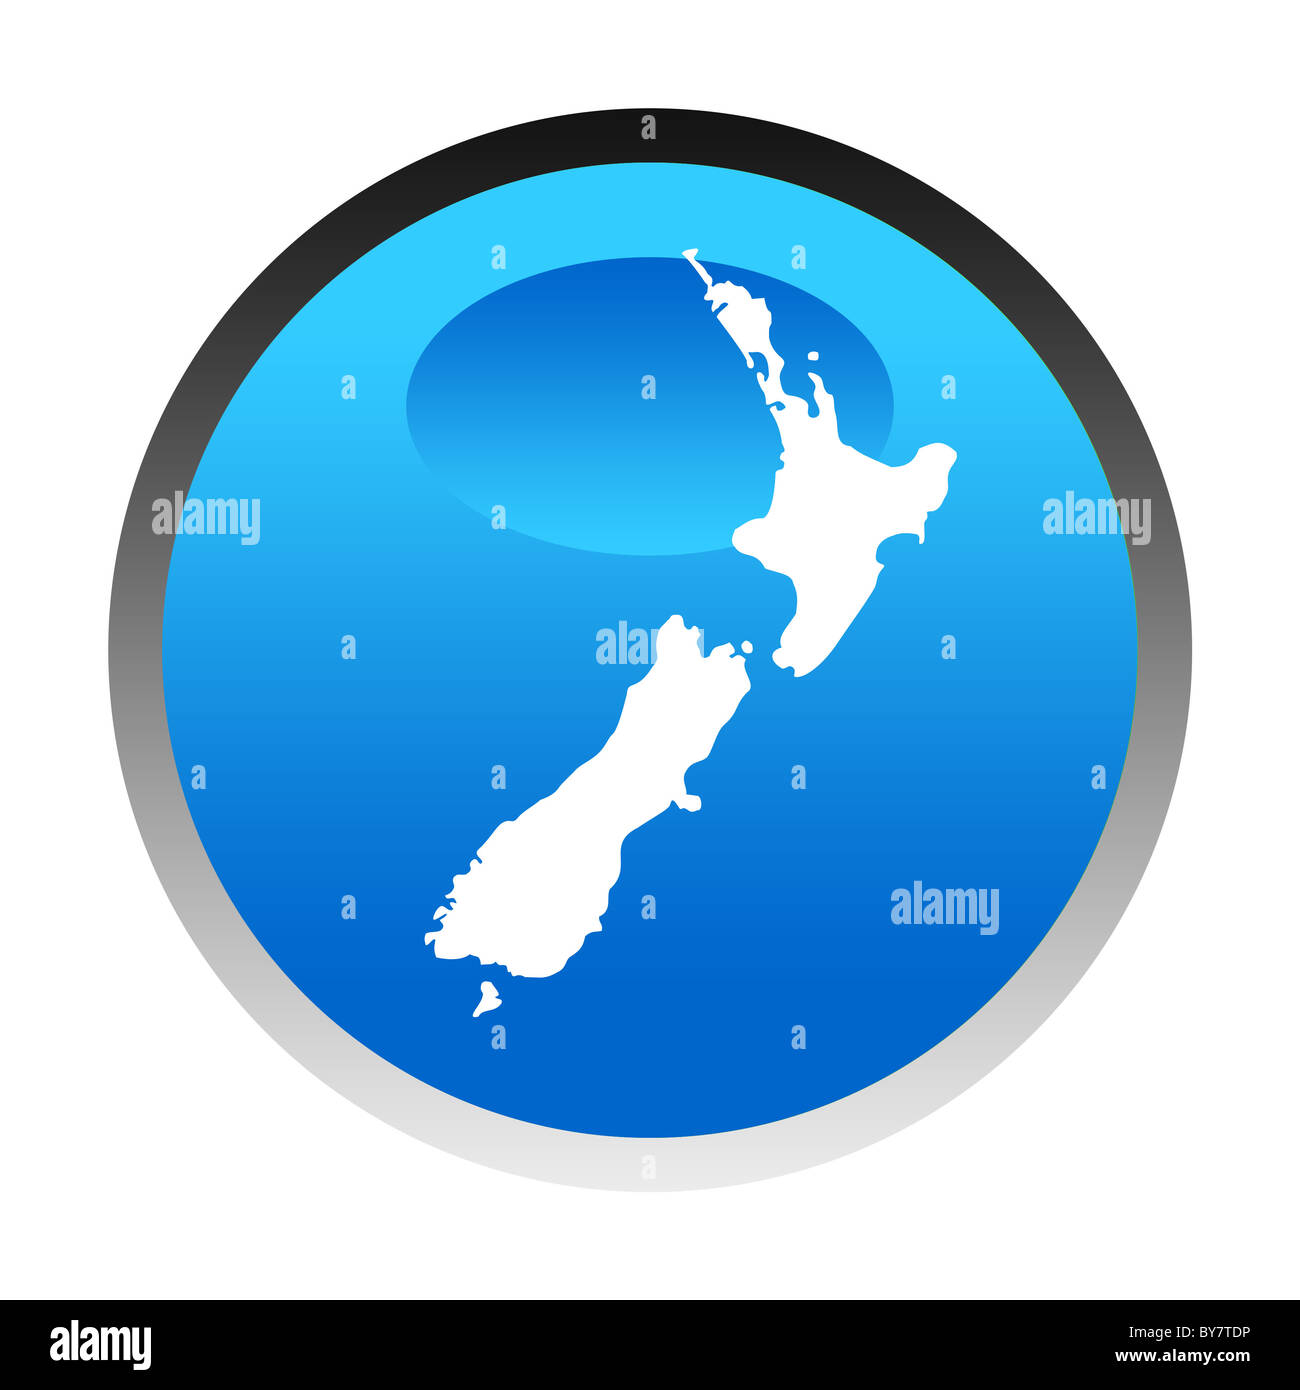 New Zealand map blue circular button isolated on white background. Stock Photo